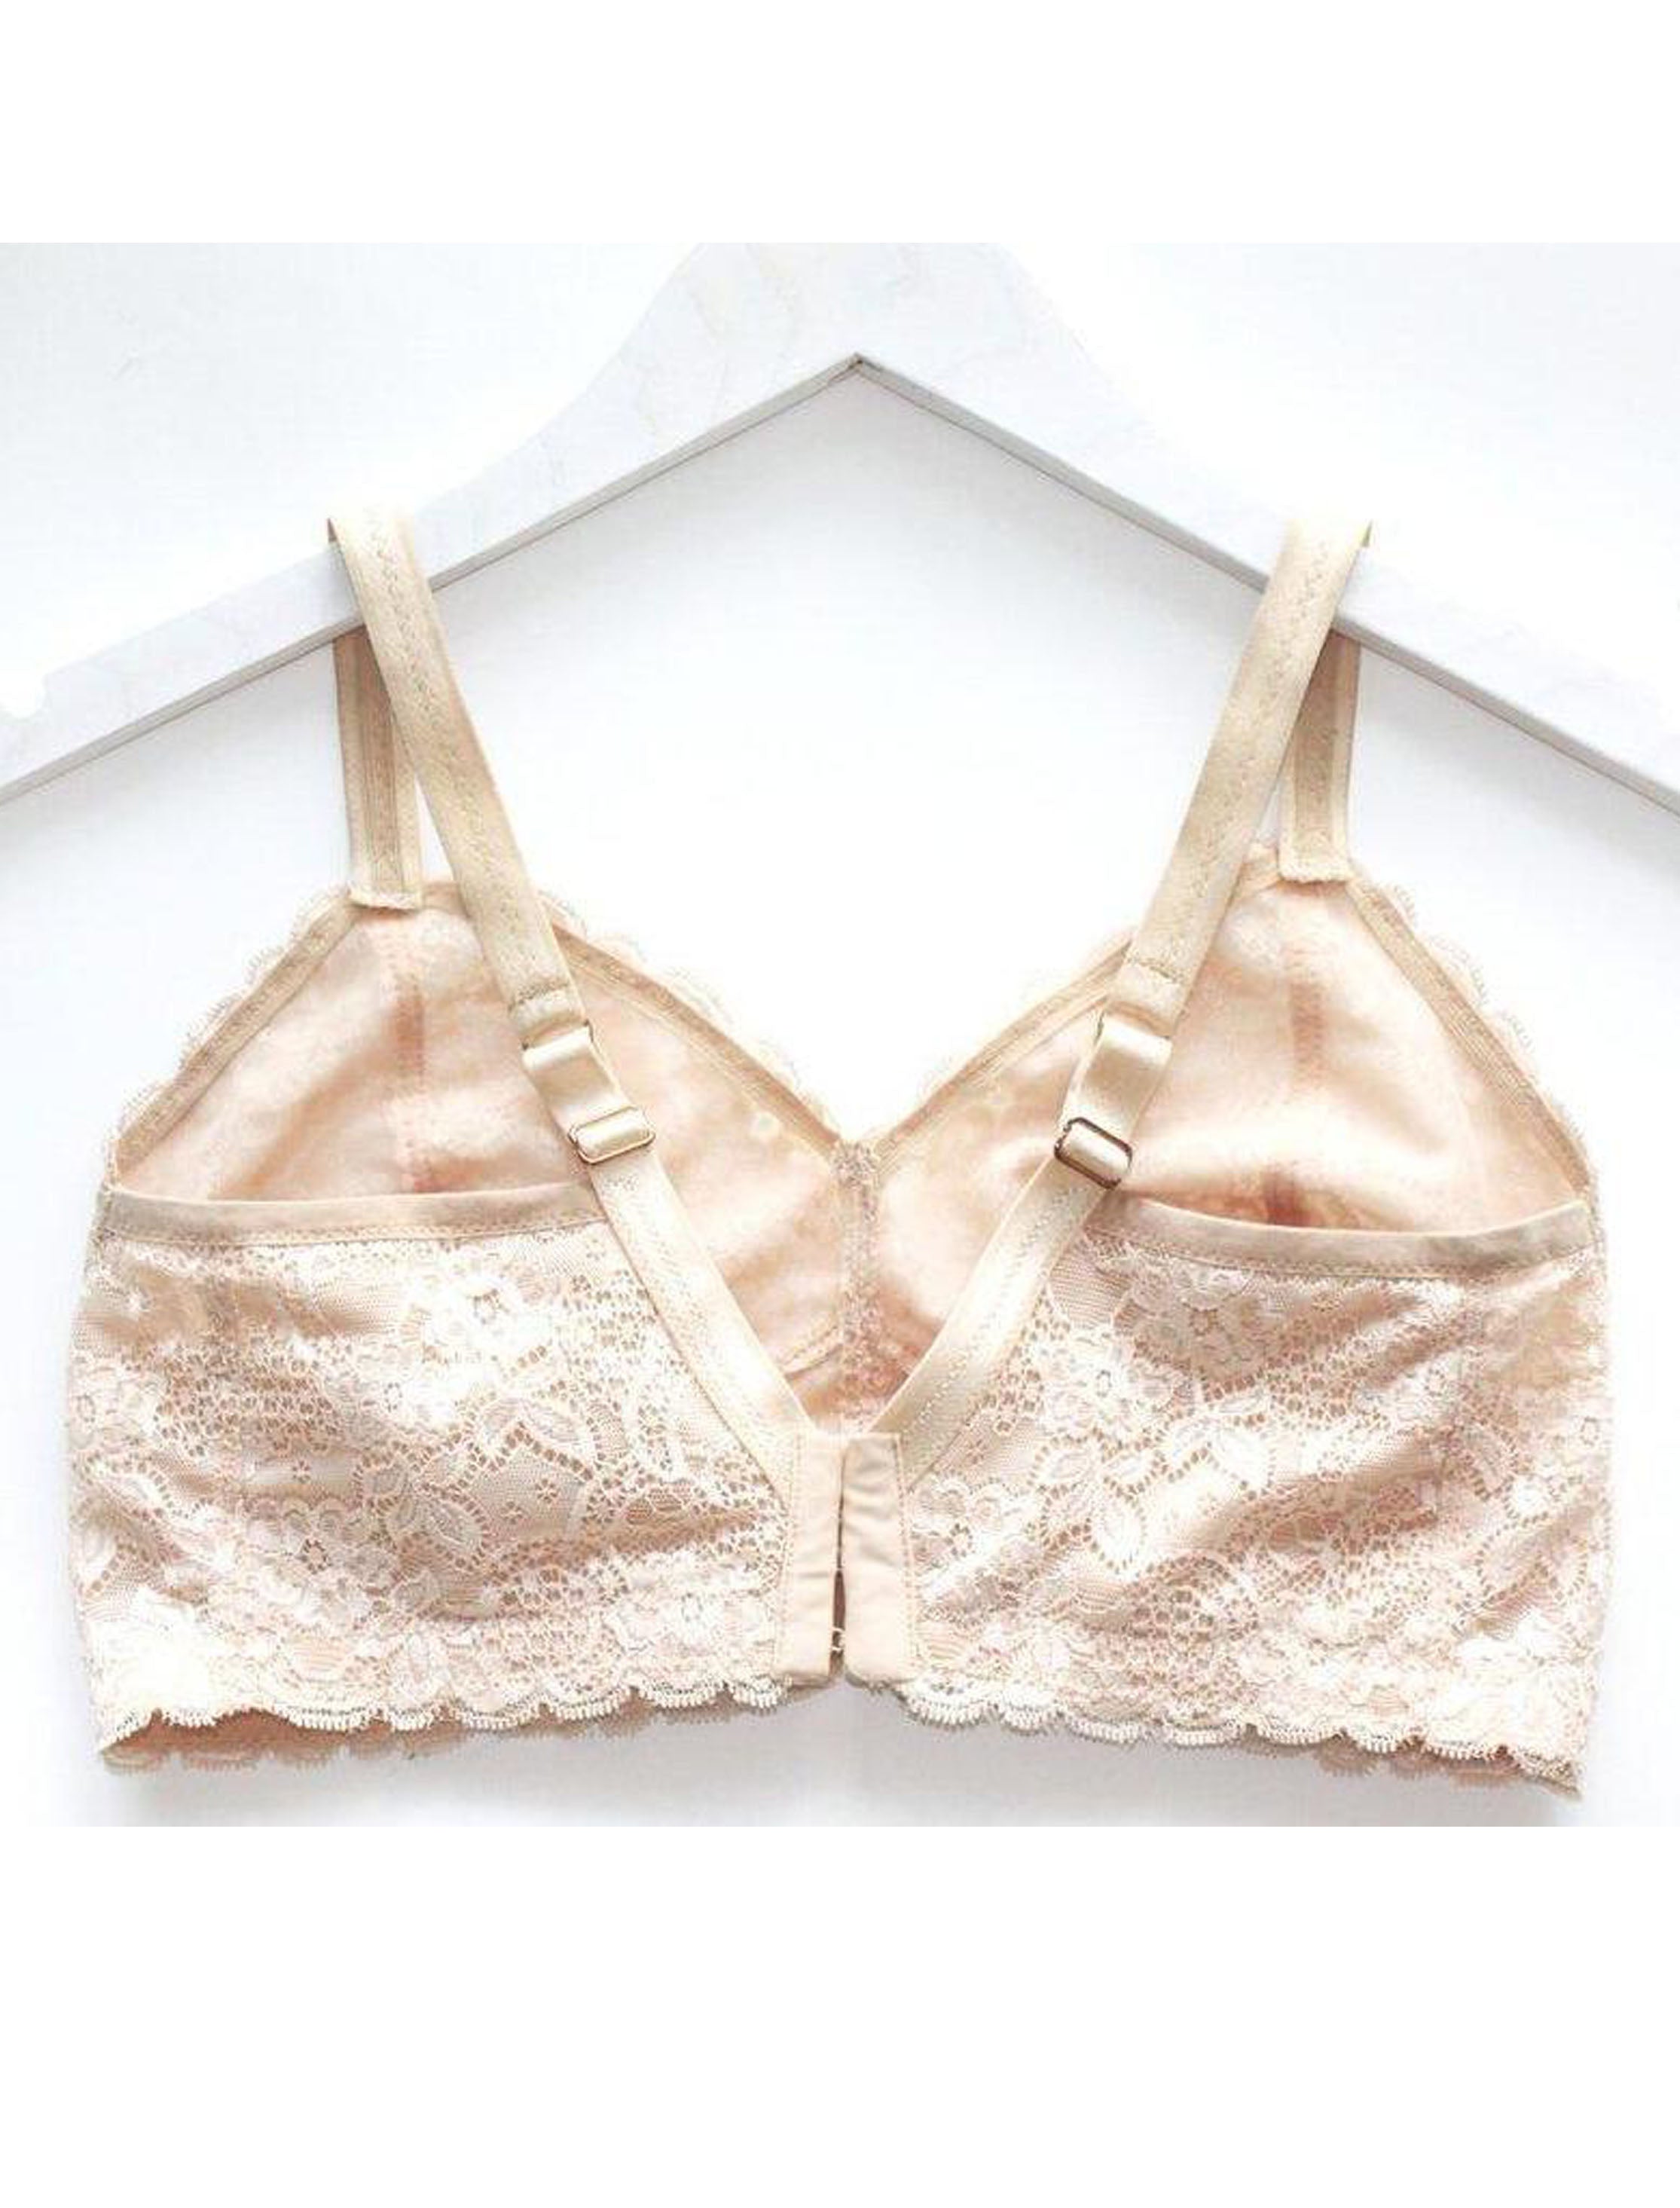 Back view of a custom made wireless bra in beige scalloped lace fabric made to order by Rubies Bras.